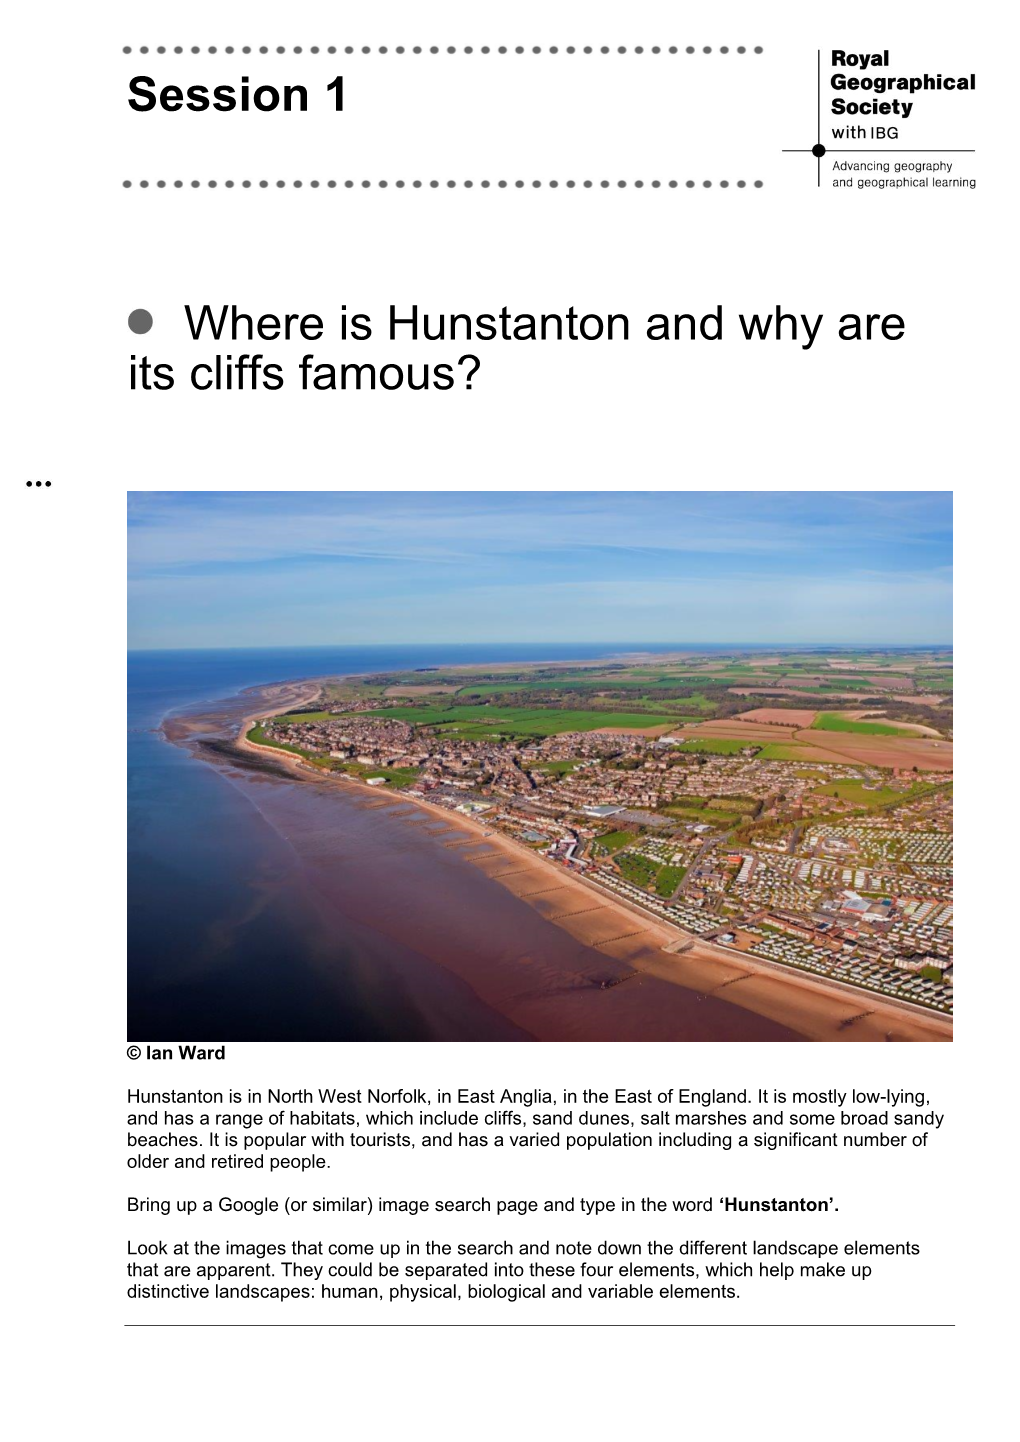 Session 1 Where Is Hunstanton and Why Are Its Cliffs Famous?